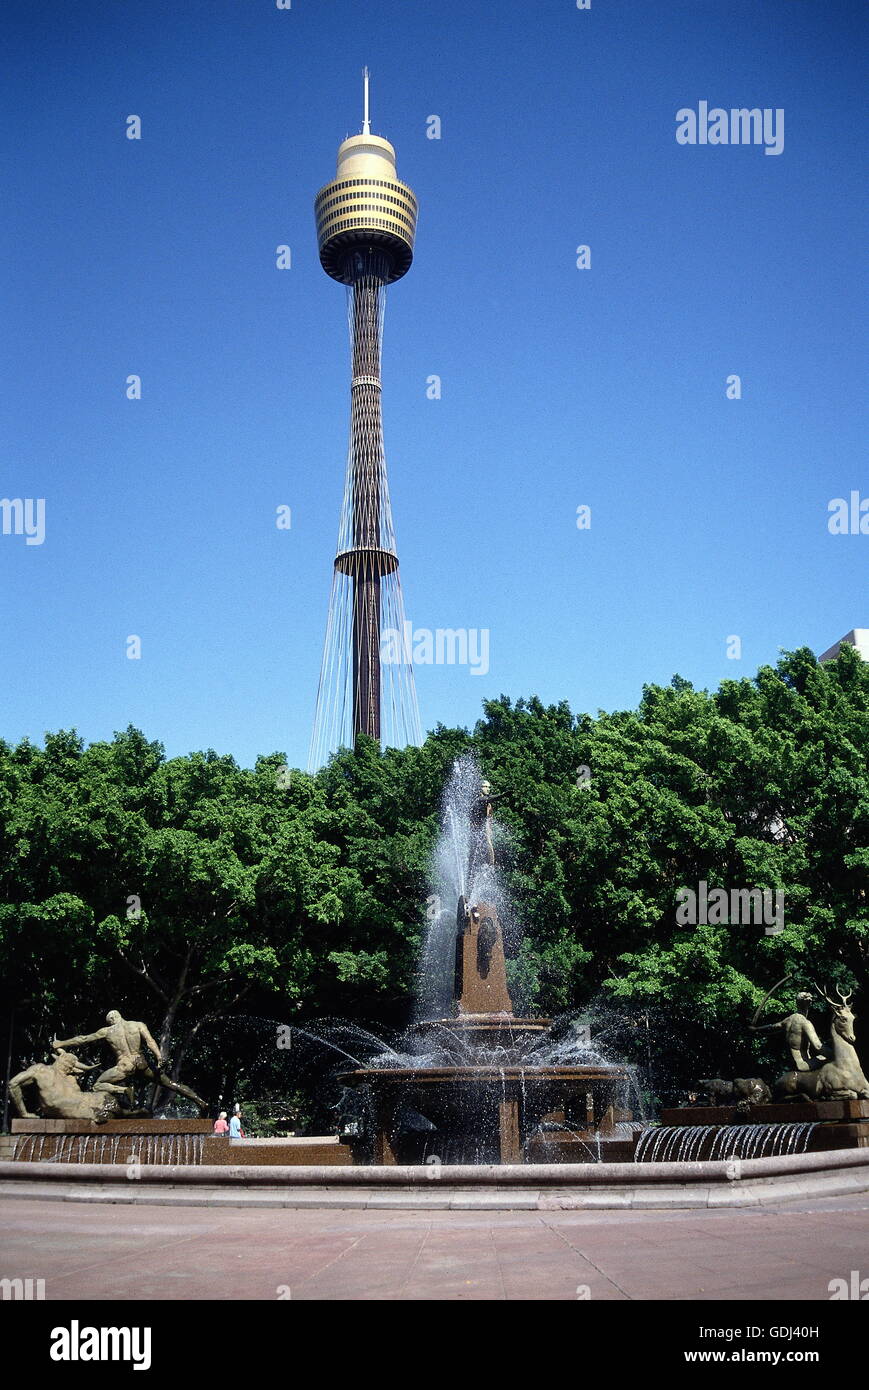 geography / travel, Australia, New South Wales, Sydney, building, AMP Tower, built: 1974 - 1981 by Donald Crone, exterior view, Hydepark with Archibald Fountain, Stock Photo